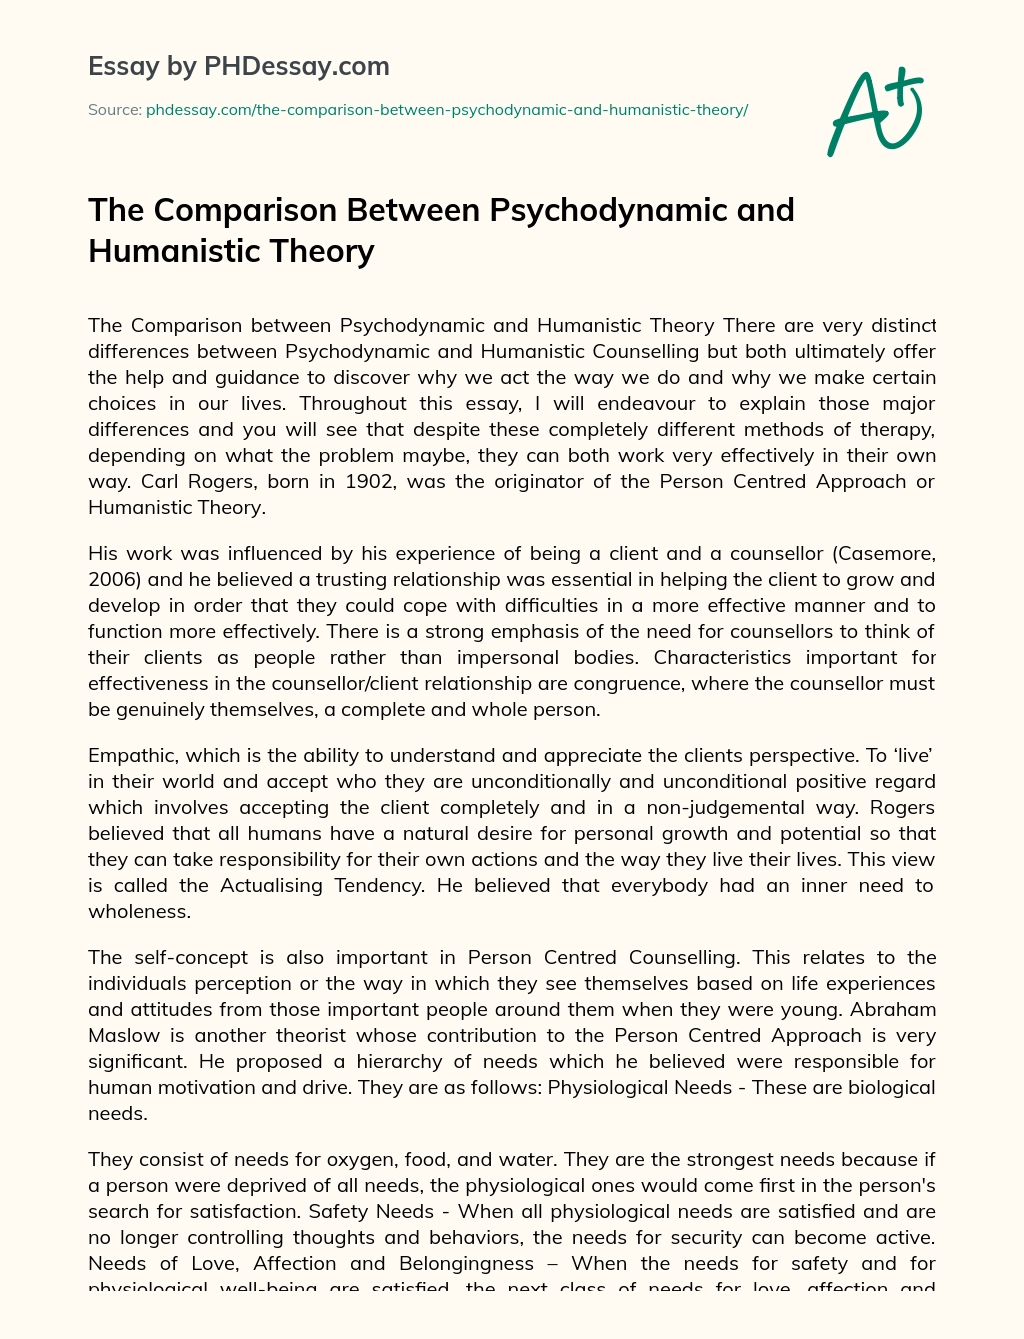 The Comparison Between Psychodynamic and Humanistic Theory essay